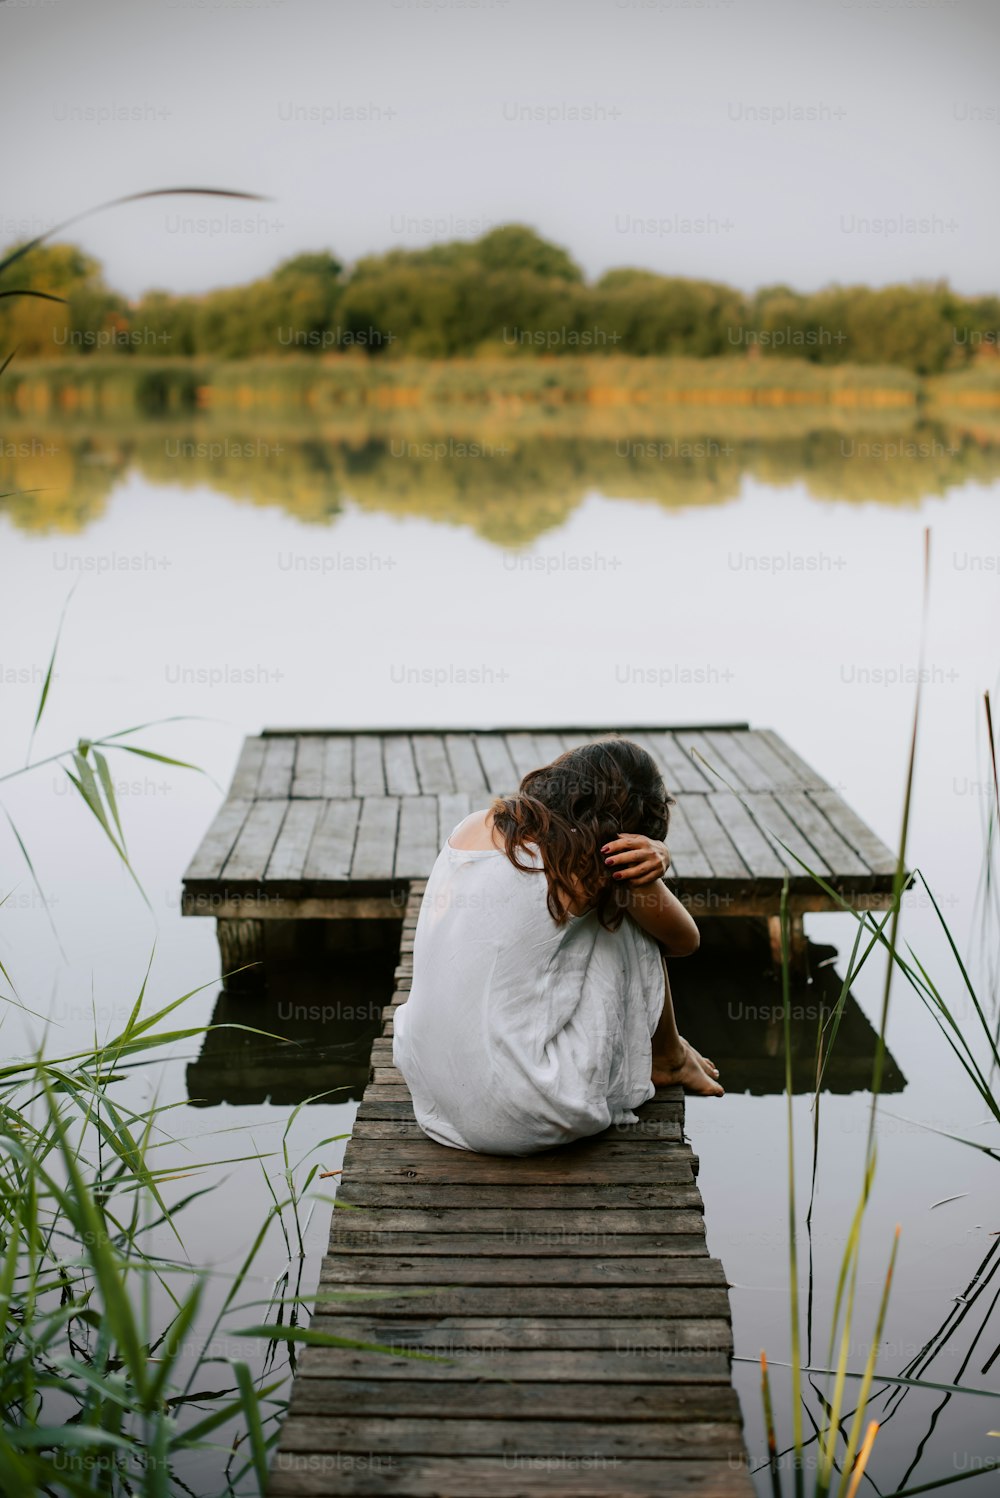 a woman sitting on a dock next to a body of water